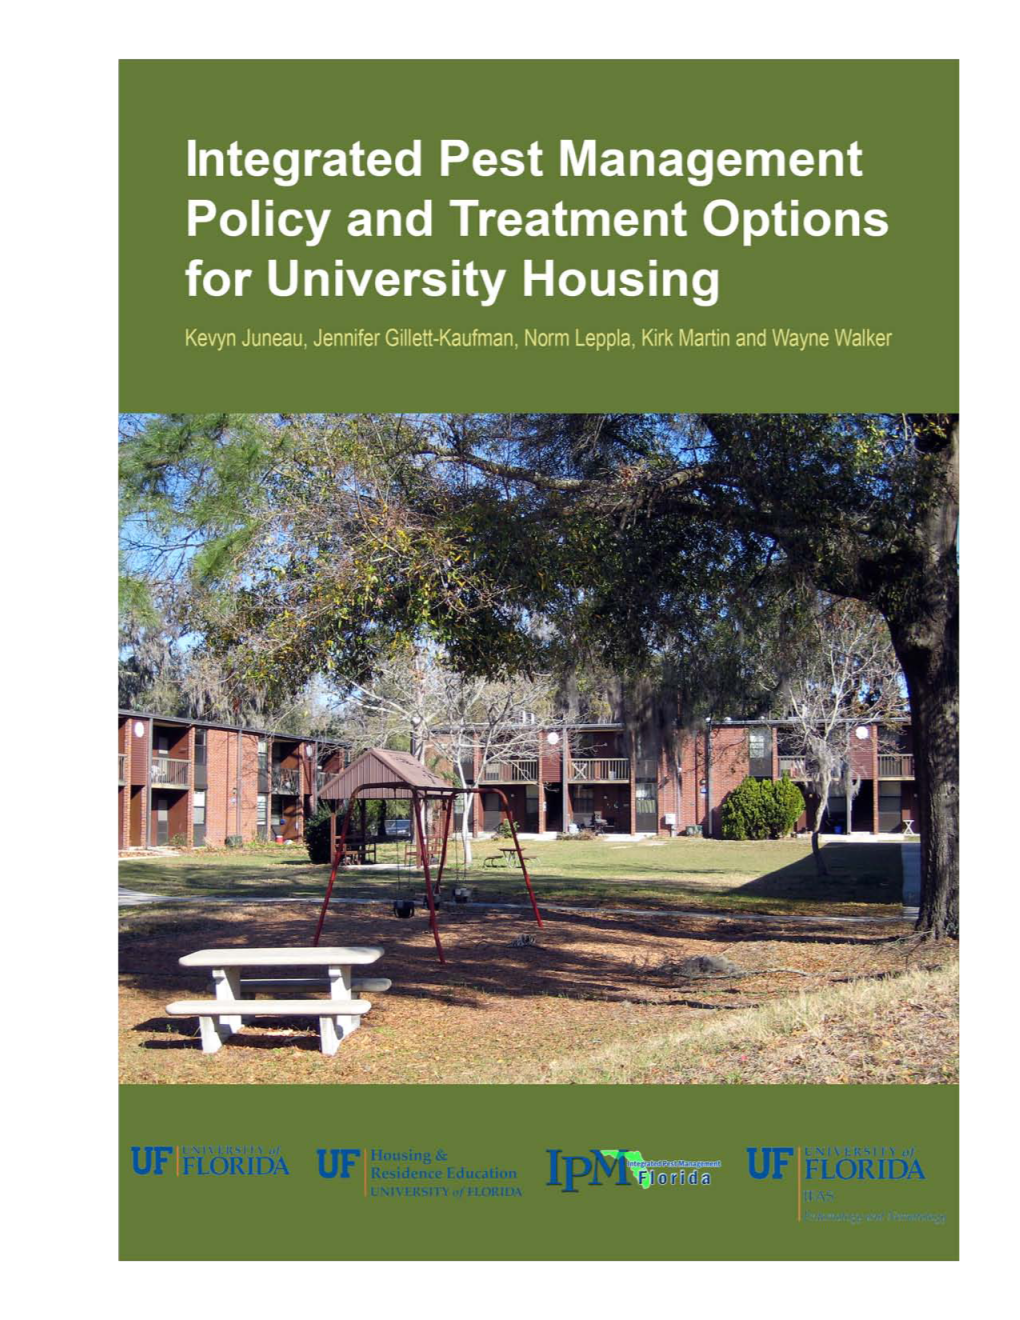 Integrated Pest Management Policy and Treatment Options for University Housing